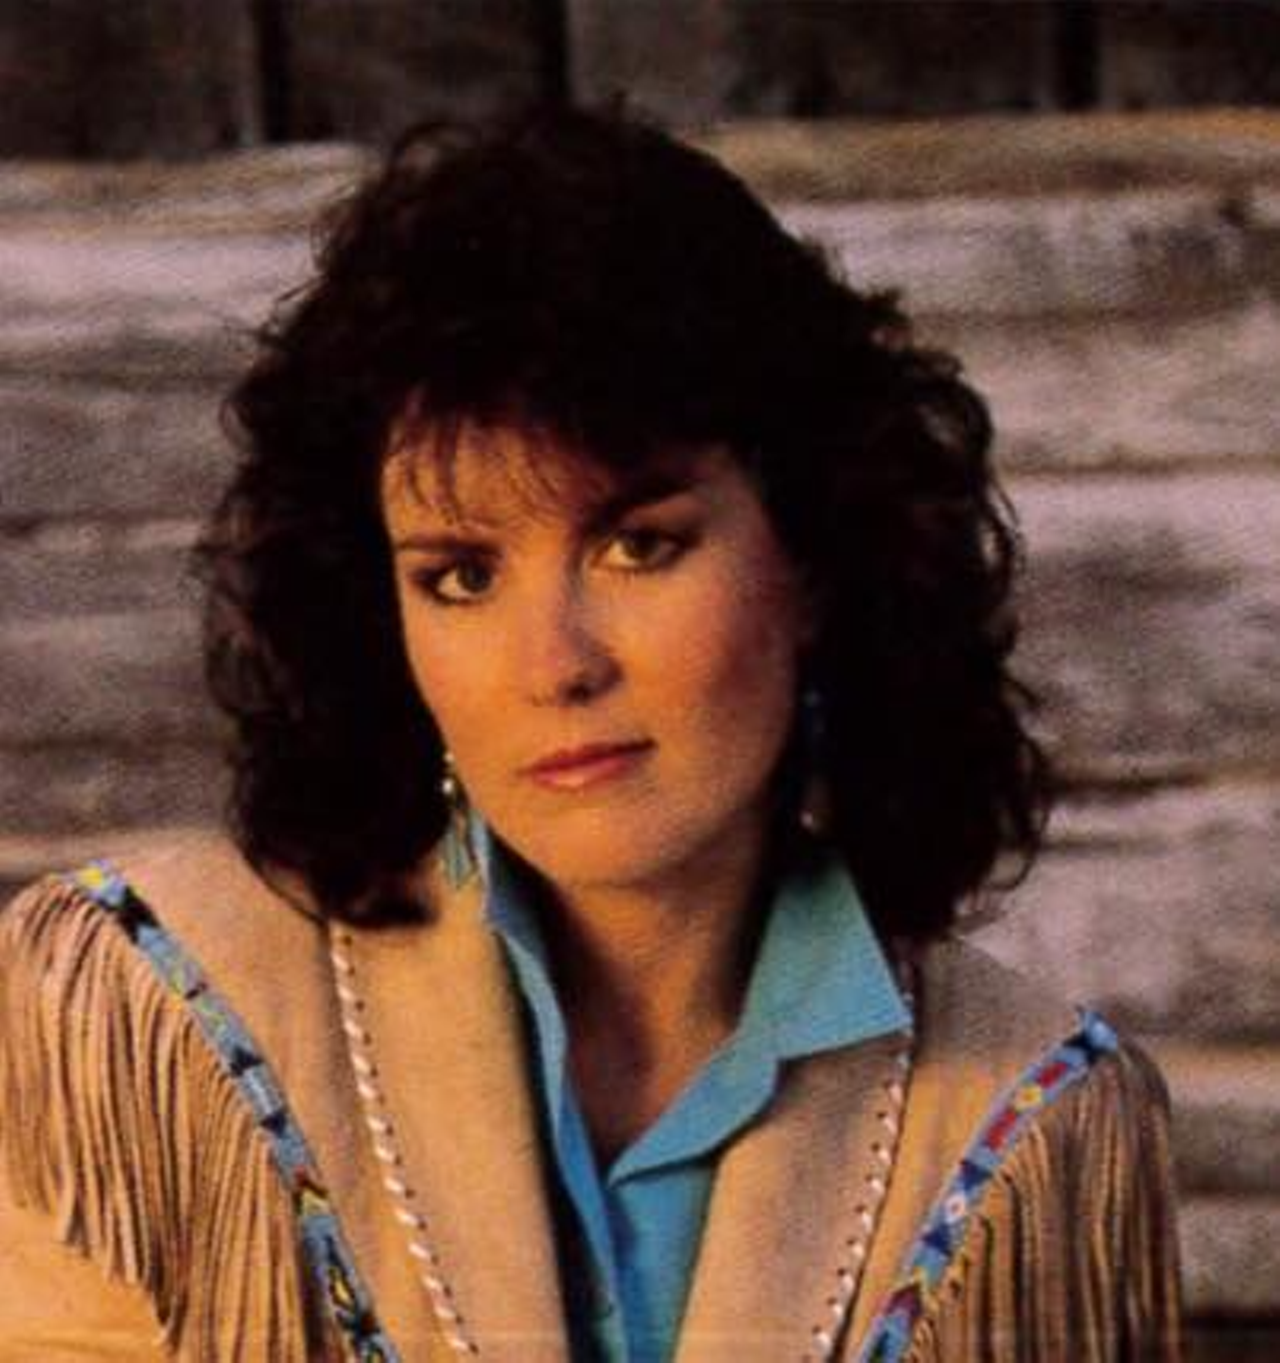 Holly Dunn
Born in San Antonio in 1957, Dunn broke into music during her high school years performing with the Freedom Folk Singers. After moving to Nashville in the '80s, her country career exploded to include numerous charting hits including "Daddy's Hands" and "You Really Had Me Going." She died of ovarian cancer in 2016. 
Courtesy Photo / MTM Music Group